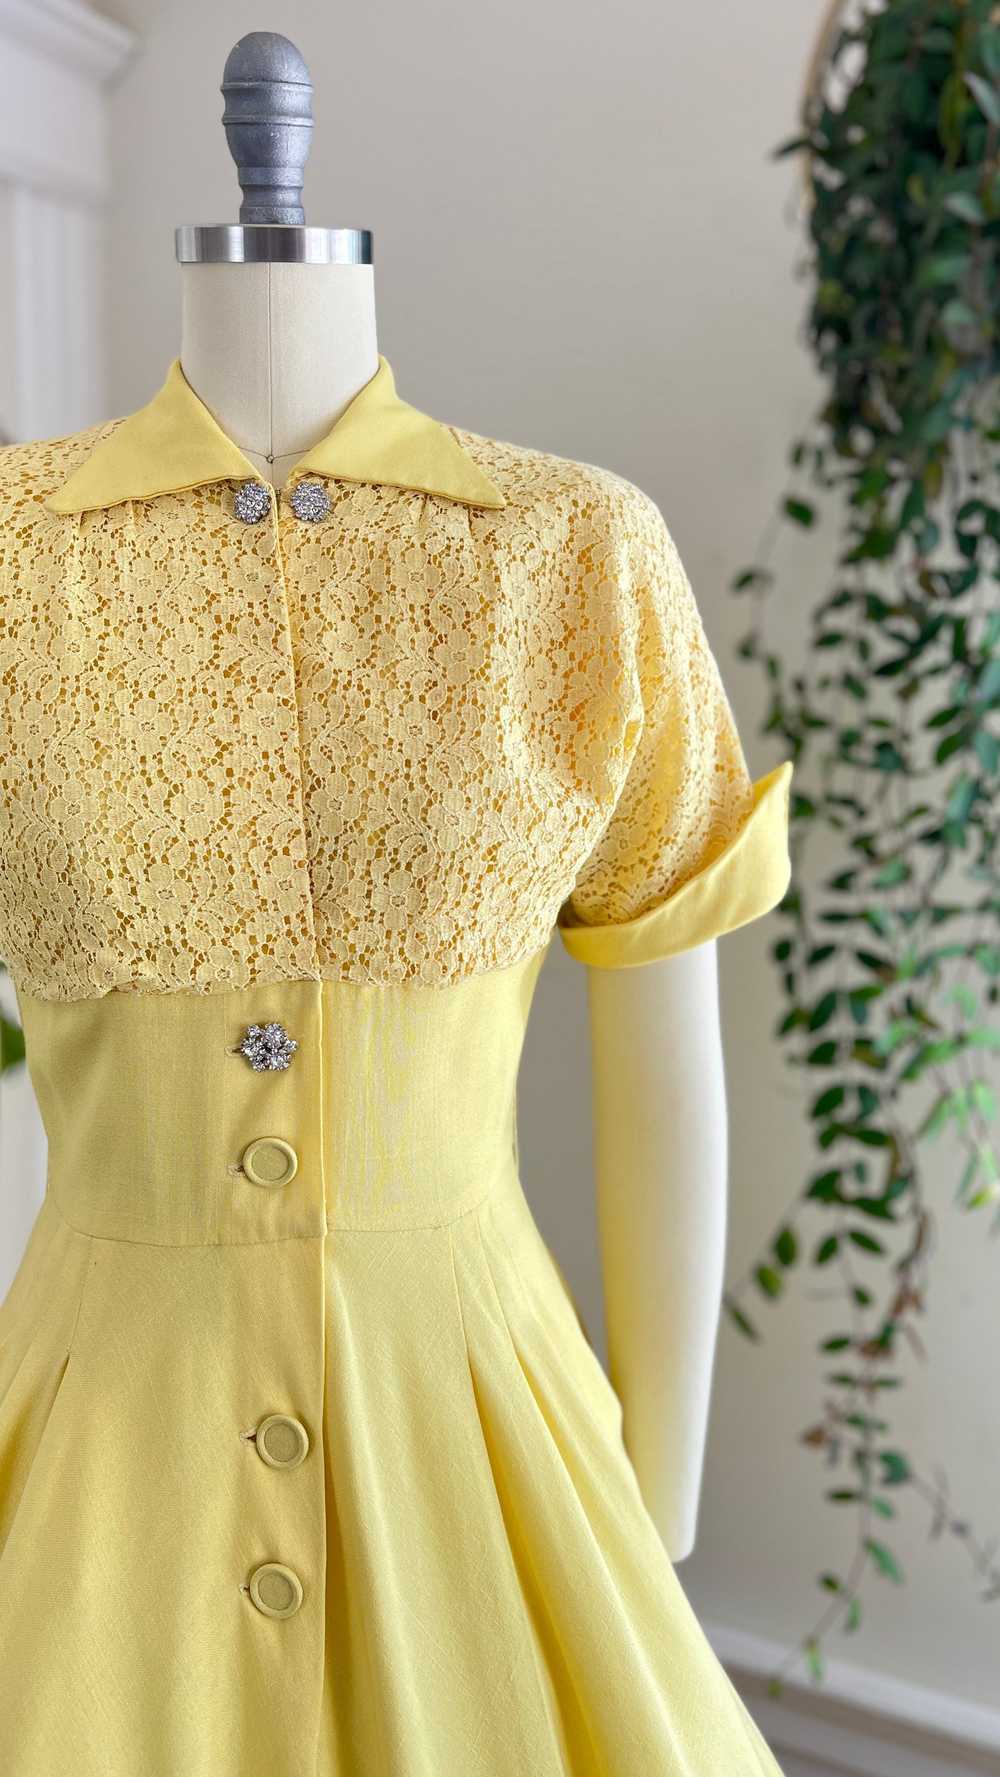 1950s Linen & Lace Dress | x-small/small - image 6